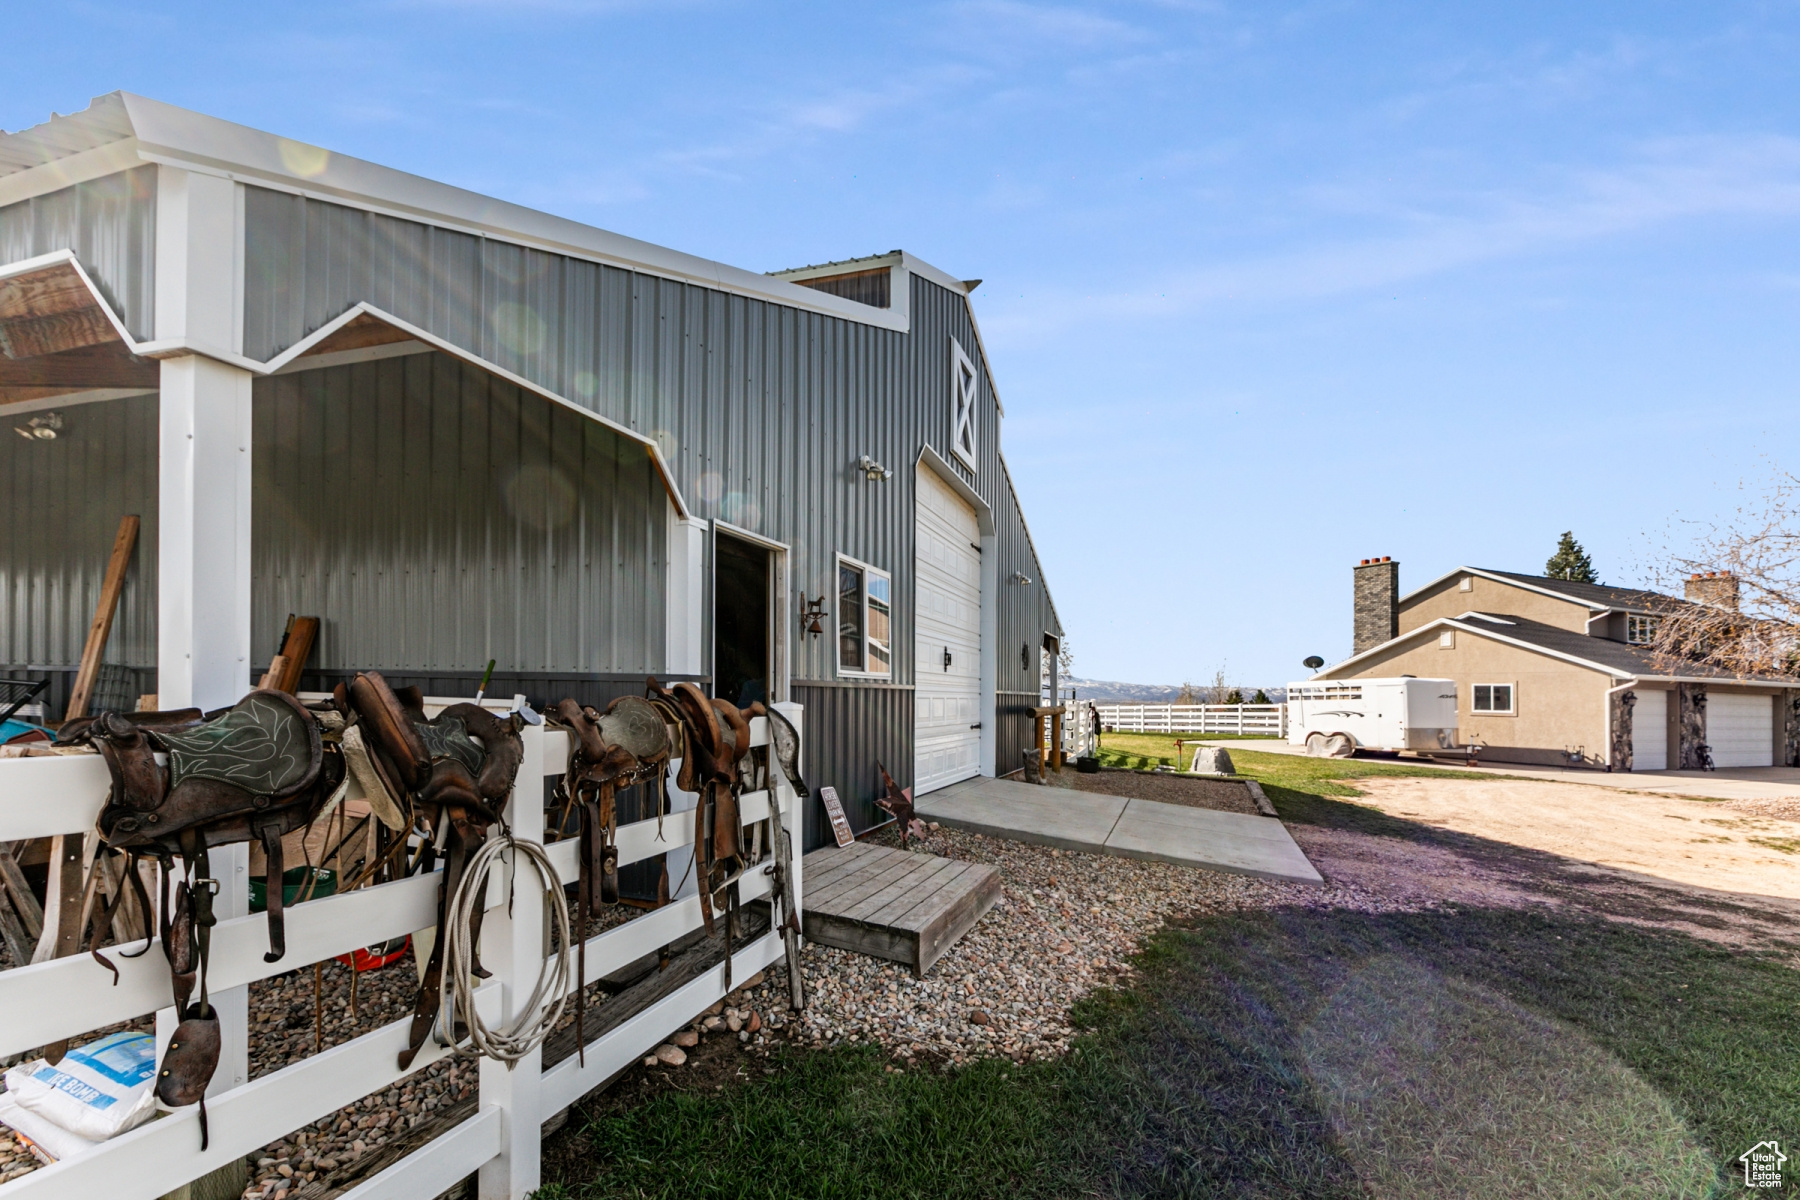 View of side of barn next to the tack room